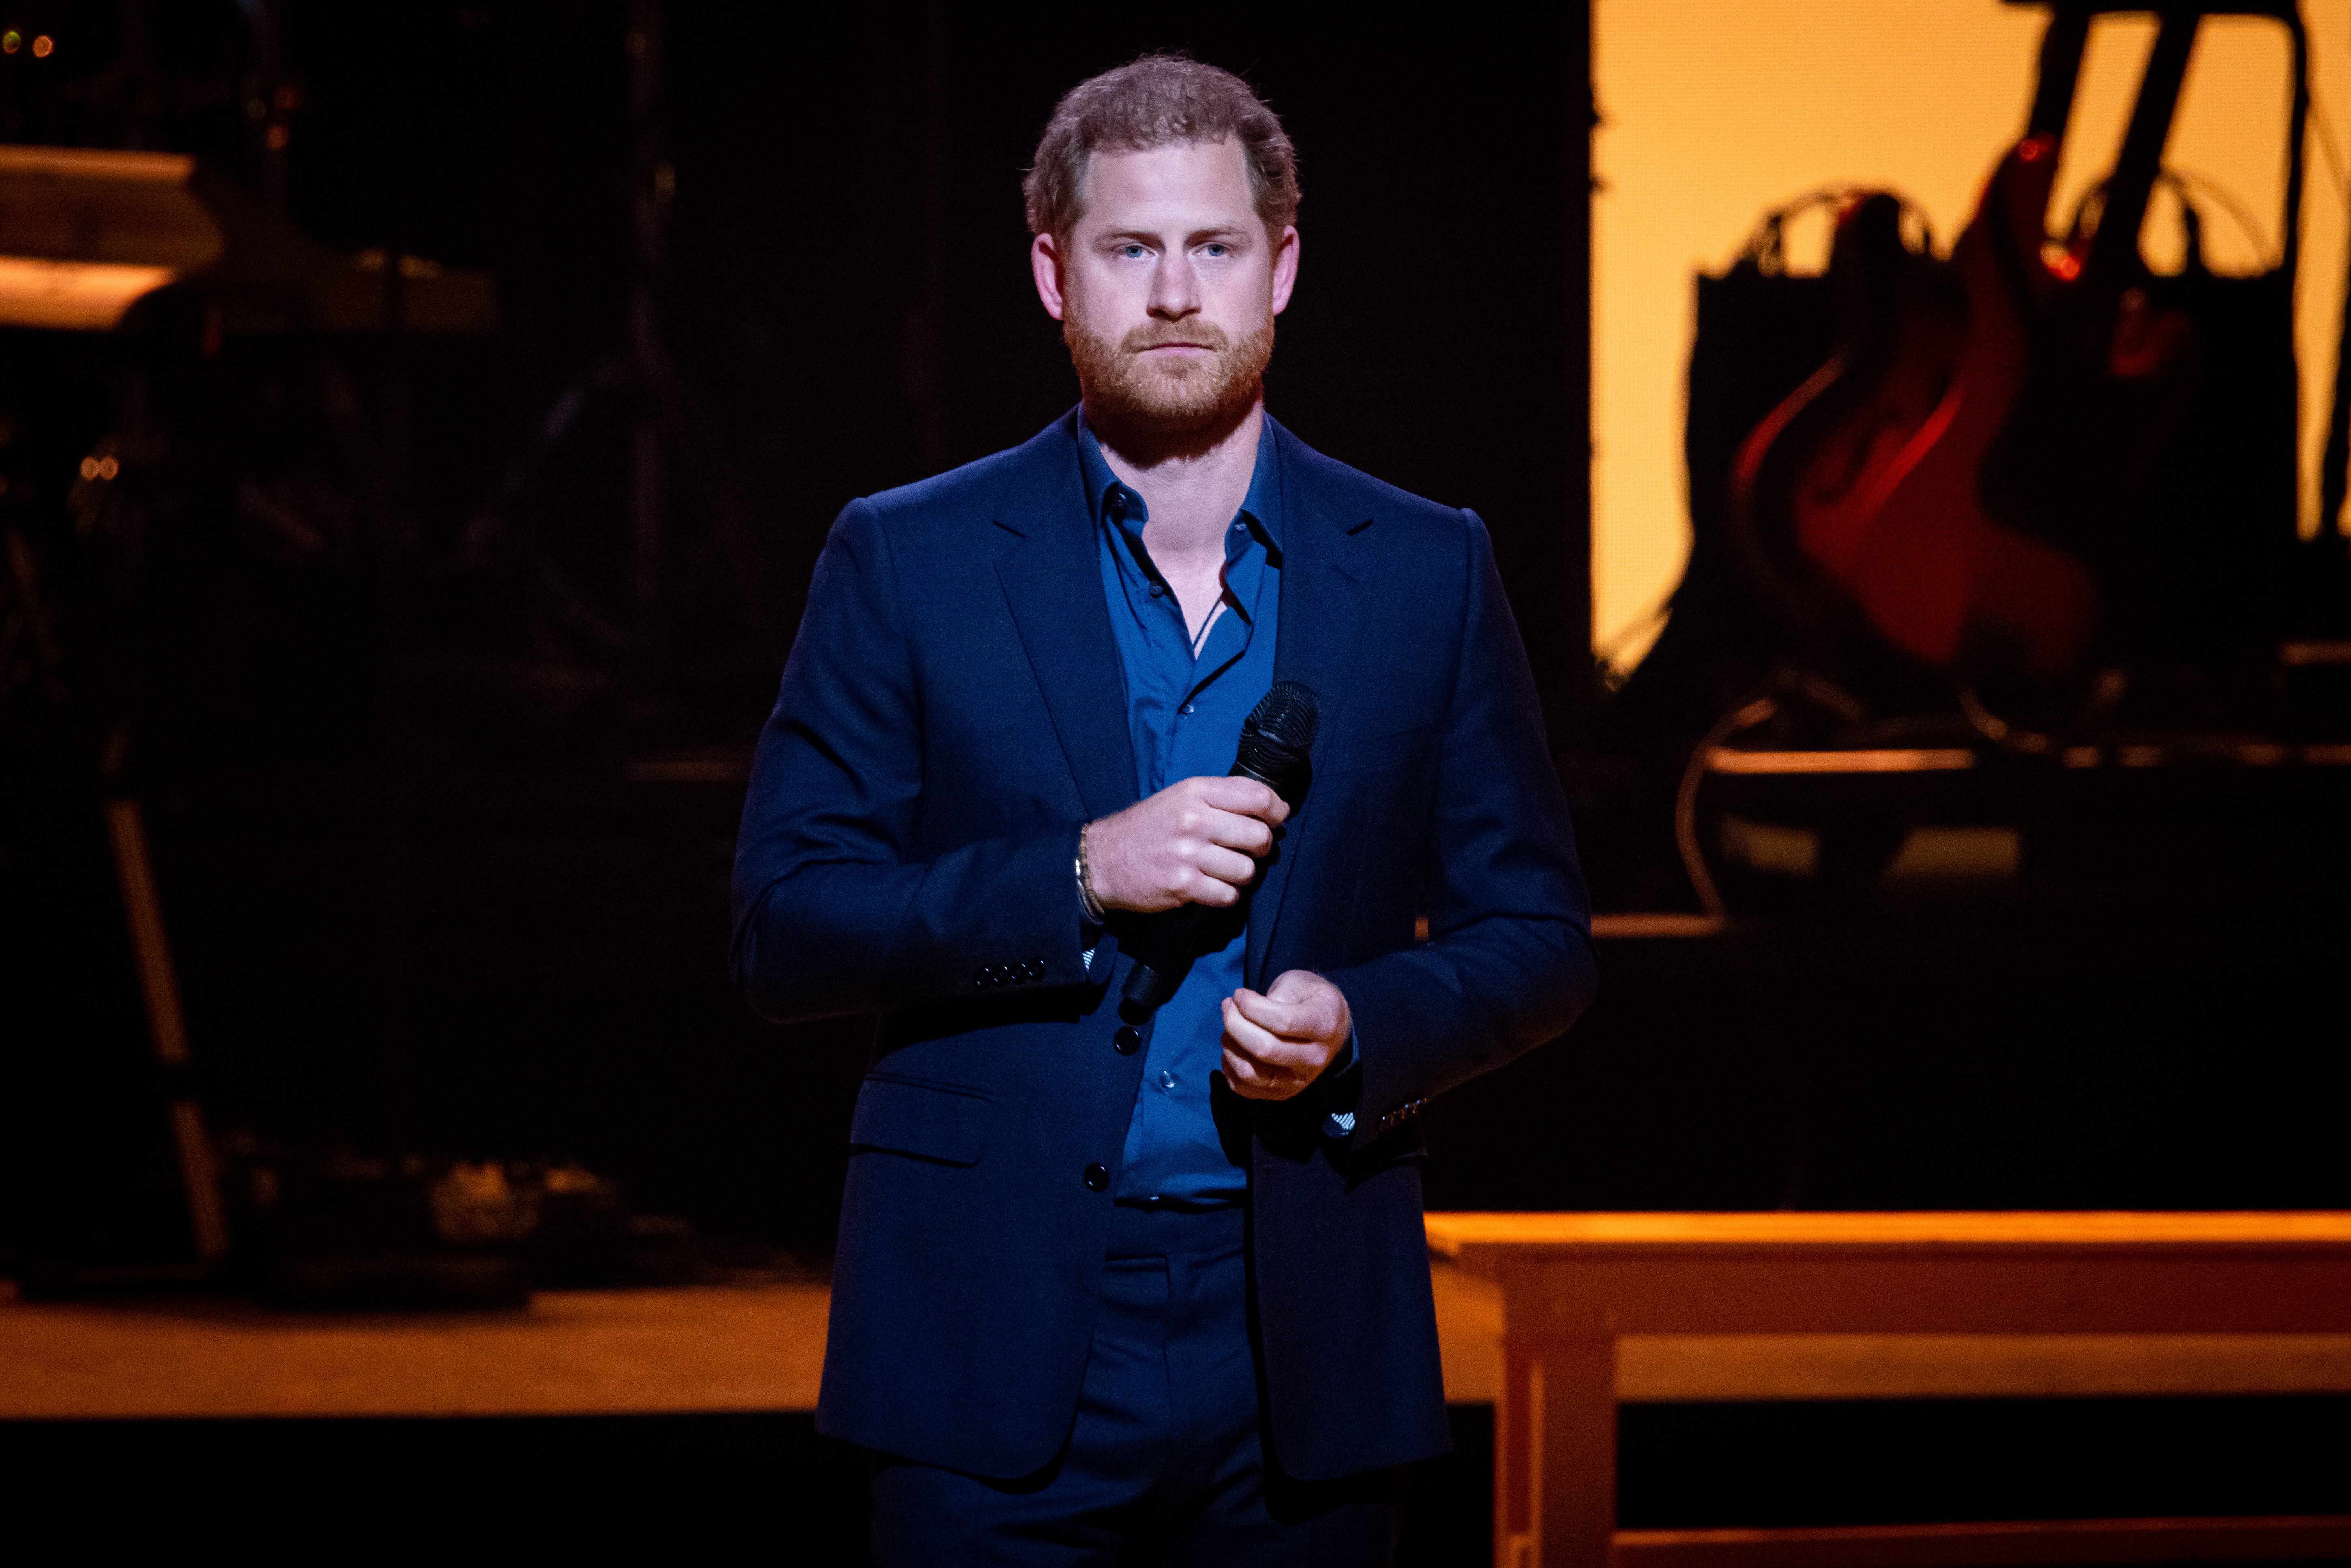 Prince Harry during the closing ceremony of the Invictus Games at Zuiderpark on April 22, 2022 in The Hague, Netherlands. | Source: Getty Images